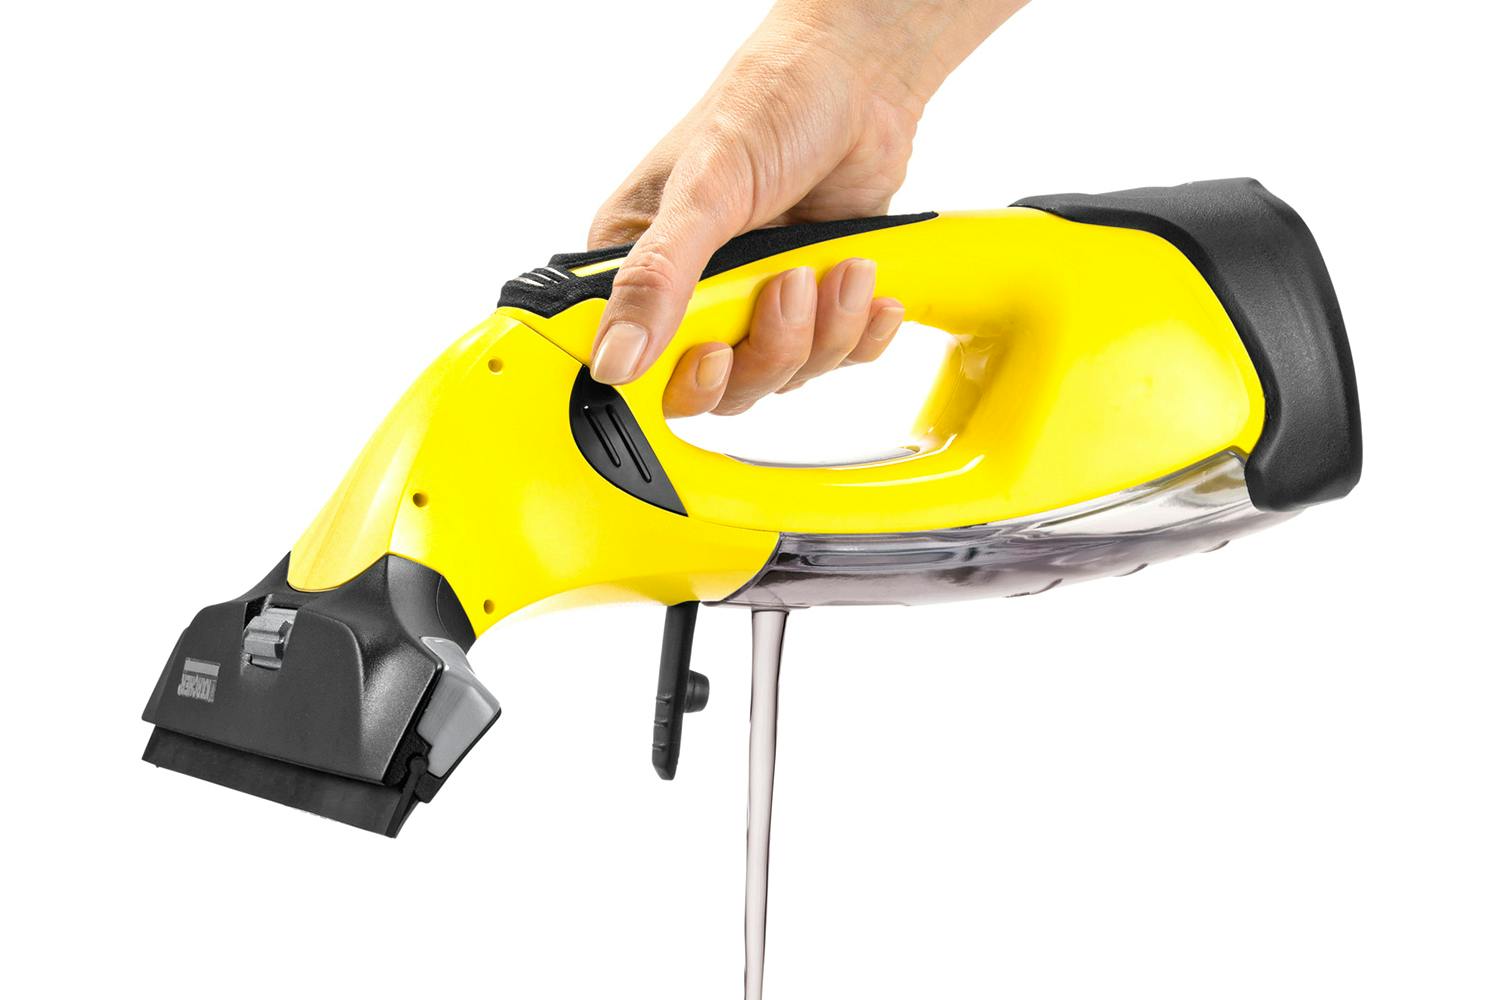 KARCHER WINDOW VAC REVIEW, WHAT WE THINK AFTER 6 MONTHS OF USE